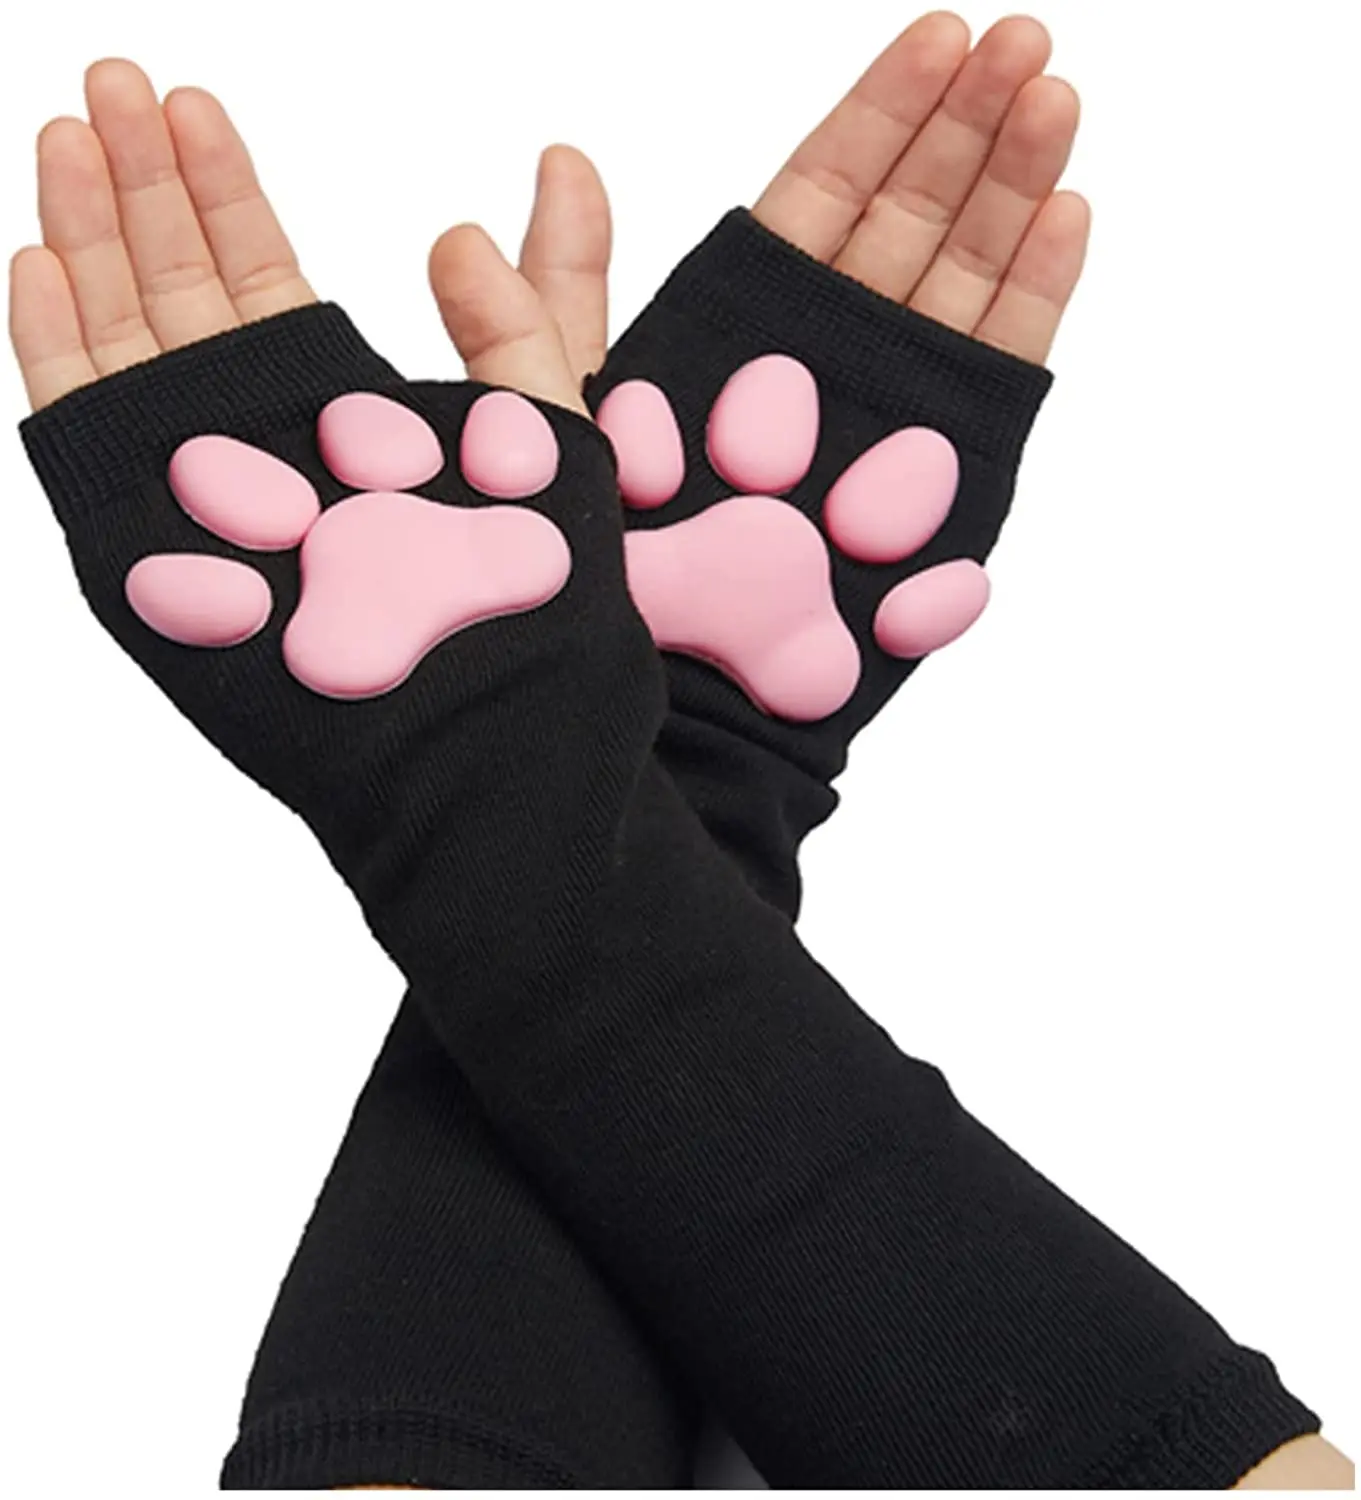 UV Sun Protection Stretchy Cute Cat Claw 3D Toes Beans Fingerless Sleeves Tattoo Cover Up Outdoor Sports Arm Sleeves Warm Gloves 3d cute cat claw sunscreen sleeve sun protection gloves kawaii cat claw fingerless sleeves lolita cosplay mitten accessories